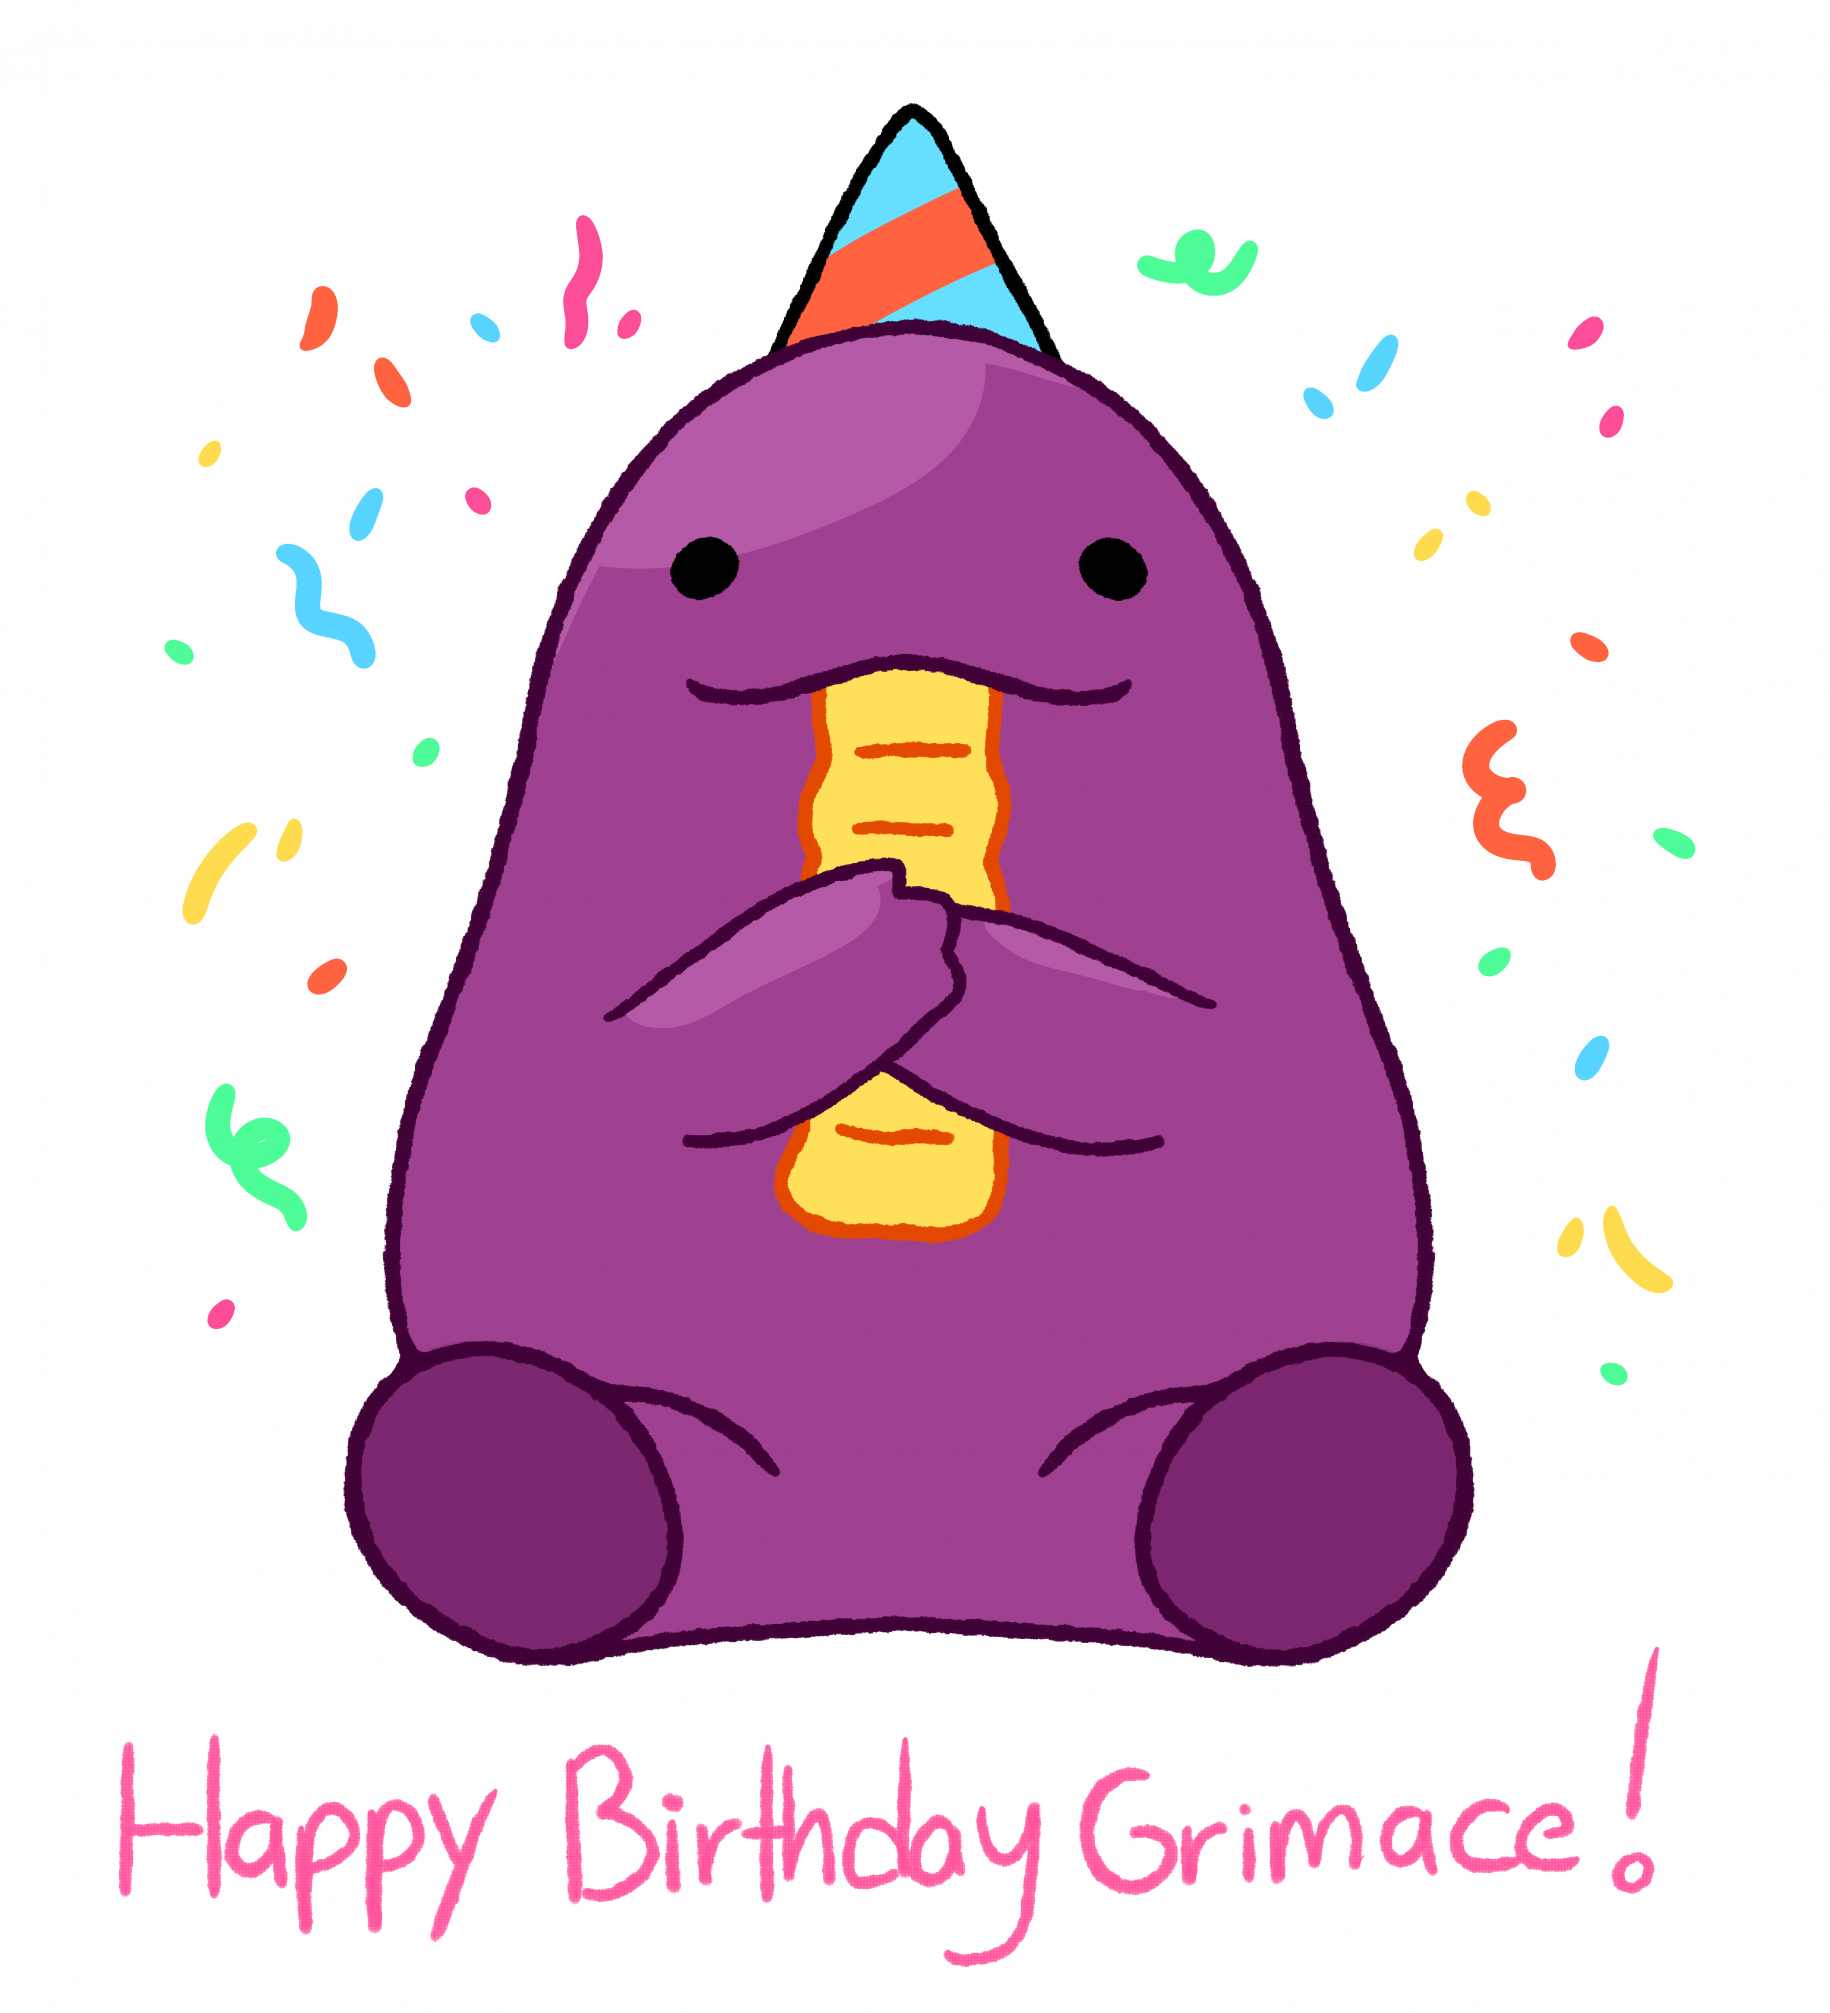 Happy Birthday Grimace! by LexisSketches -- Fur Affinity [dot] net